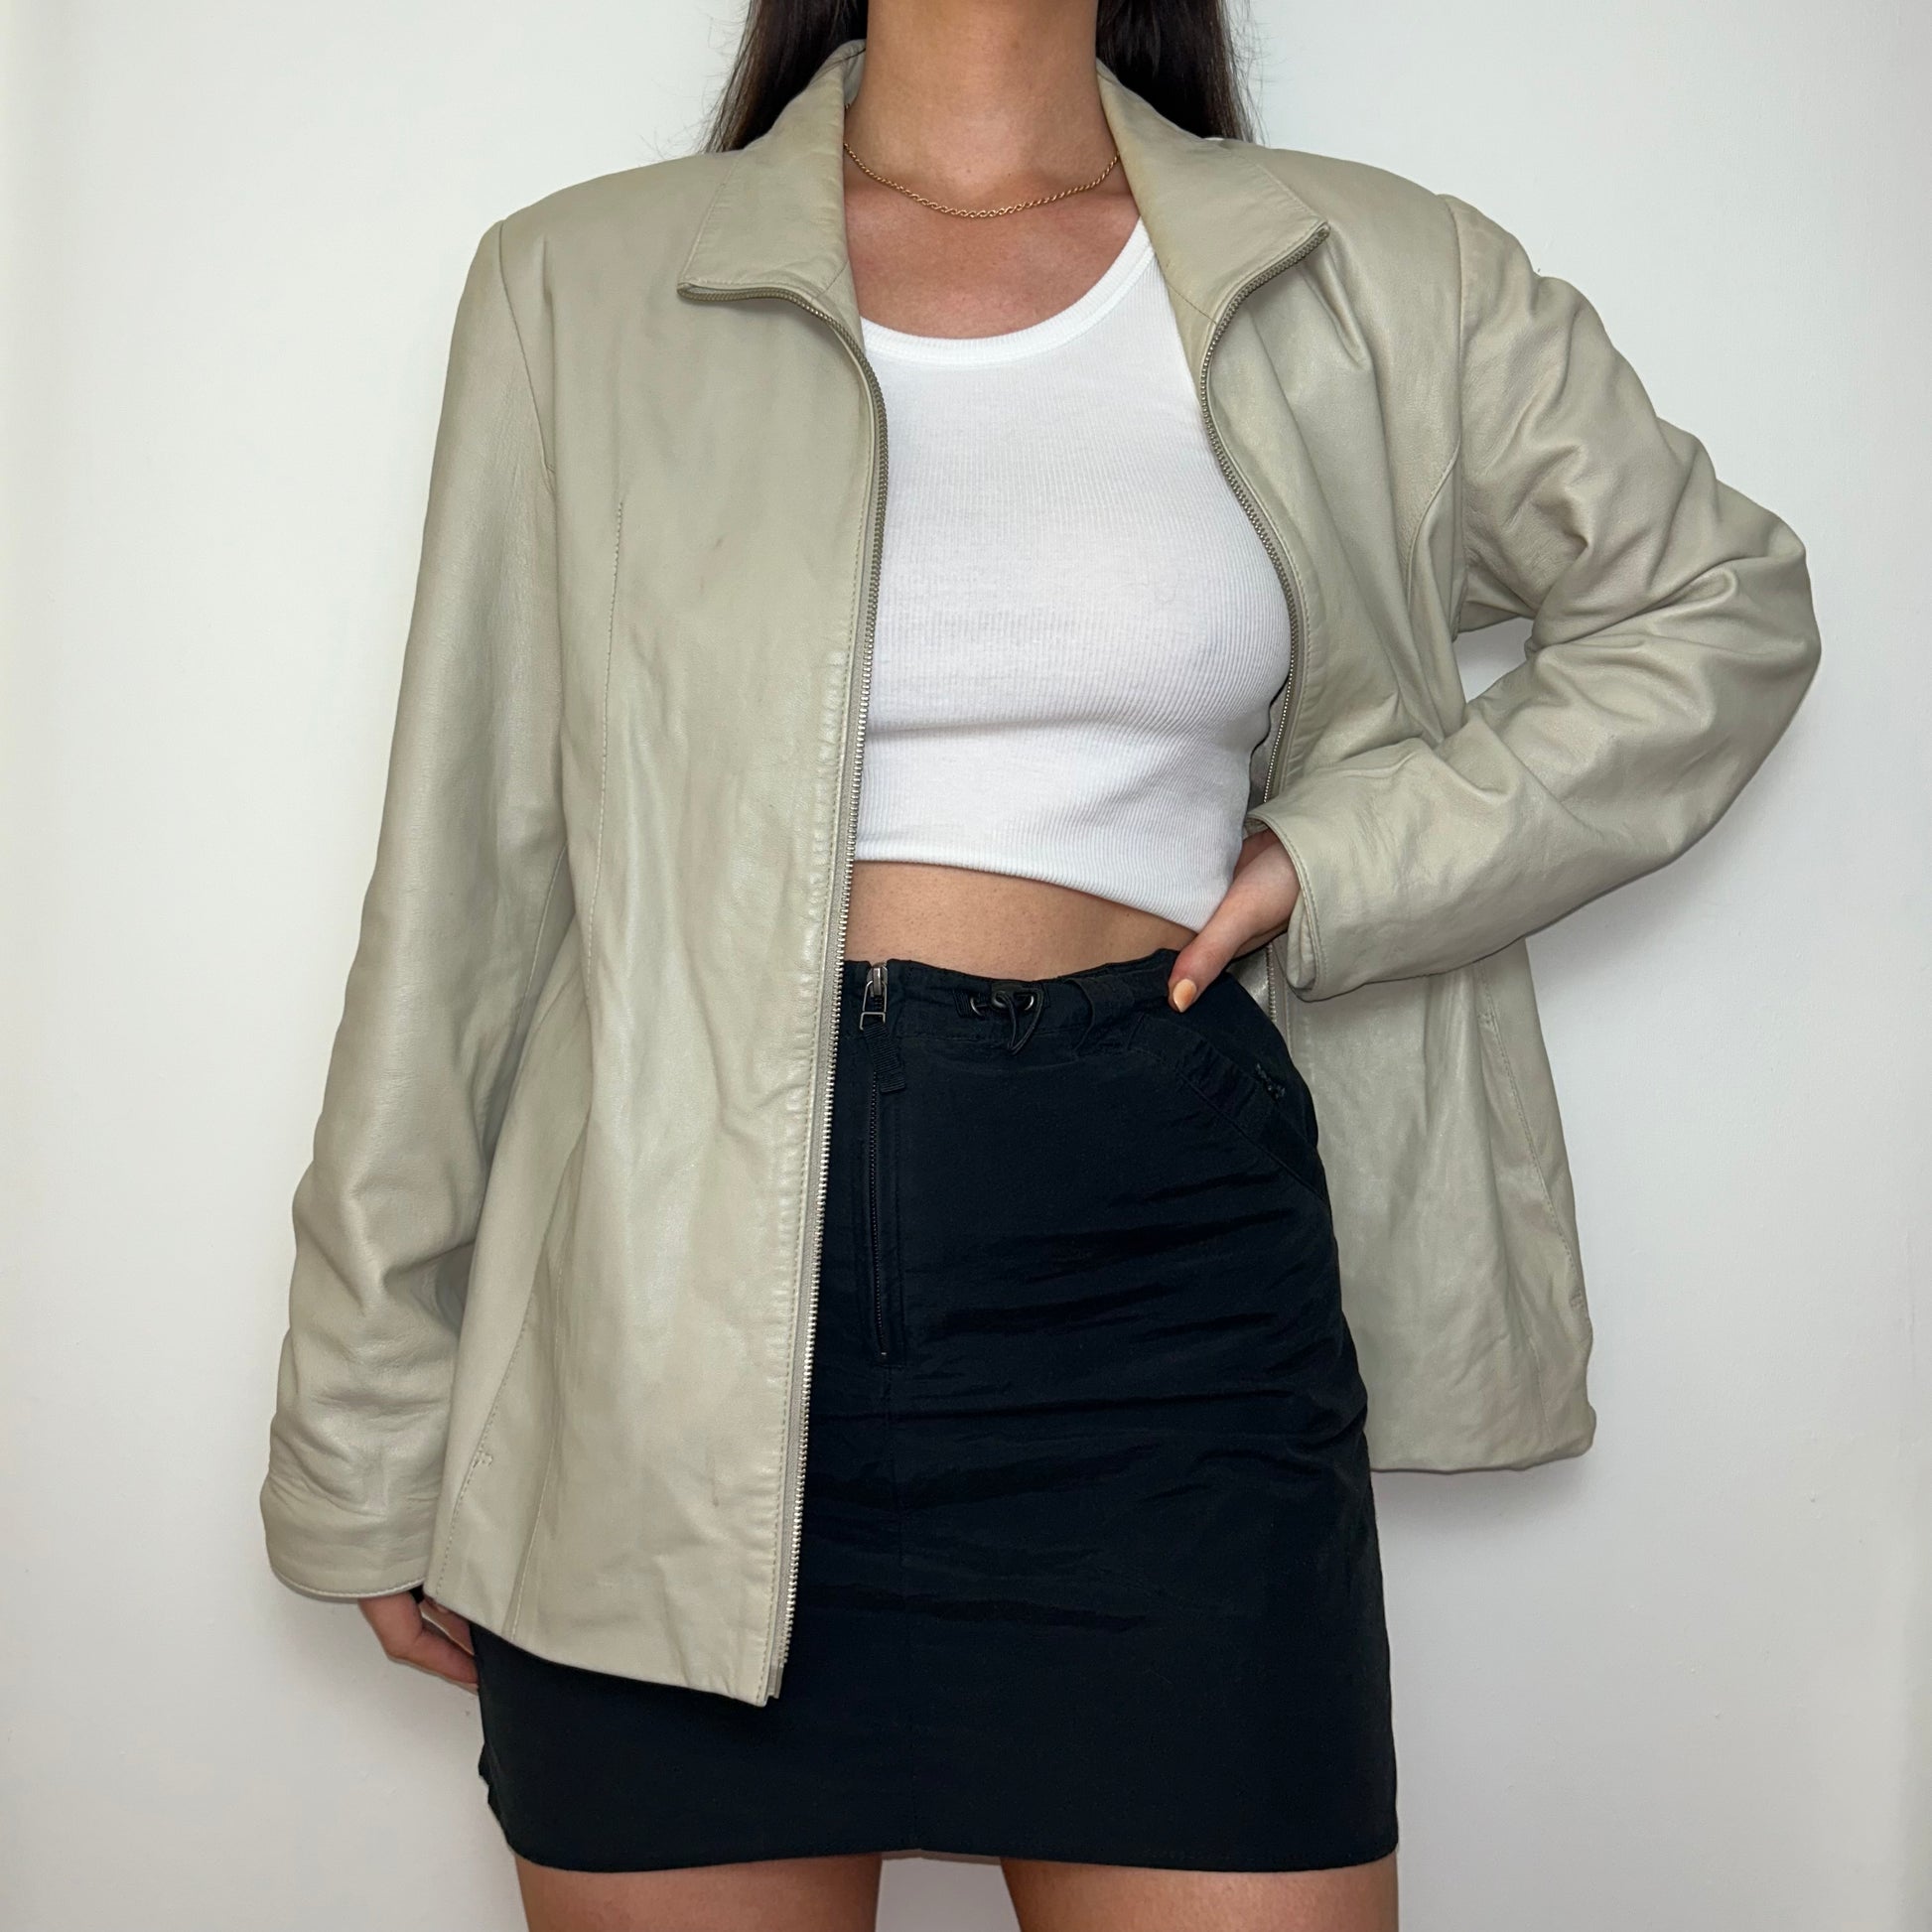 beige leather zip up jacket shown on a model wearing a white crop top and black skirt